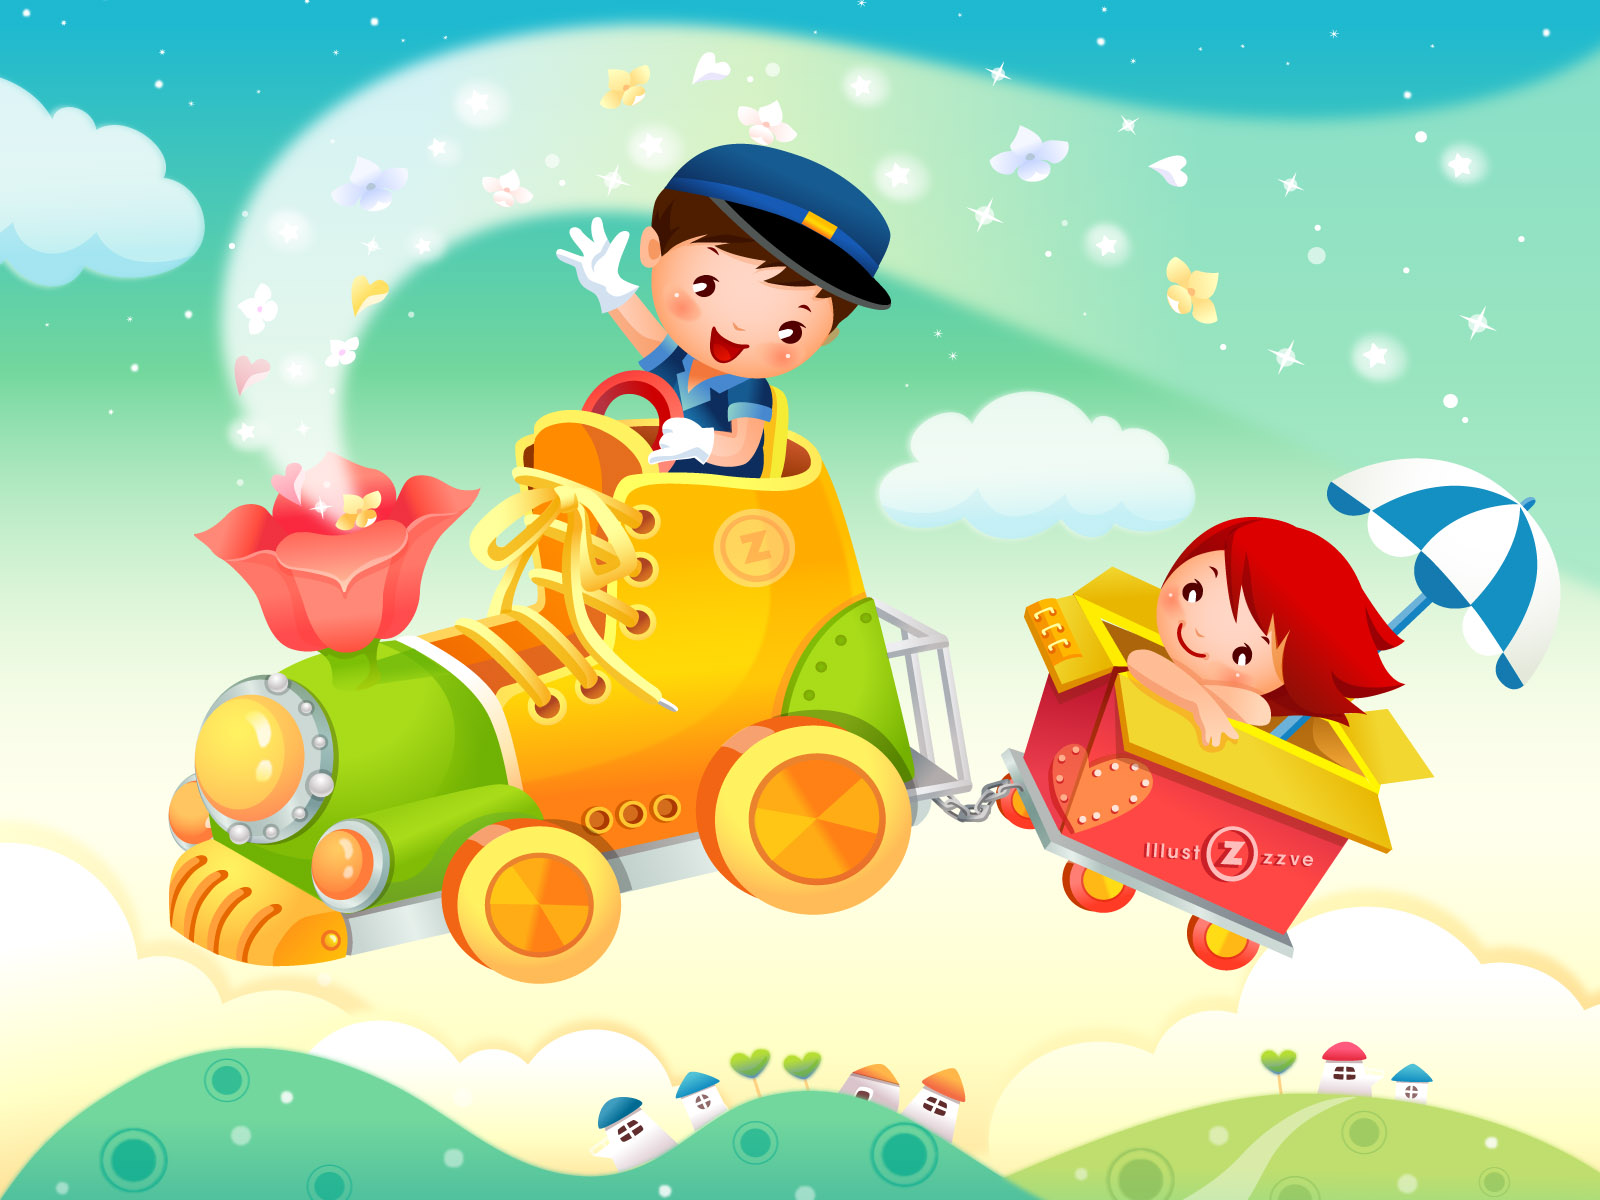 cute kids wallpaper,cartoon,illustration,child,playing with kids,play